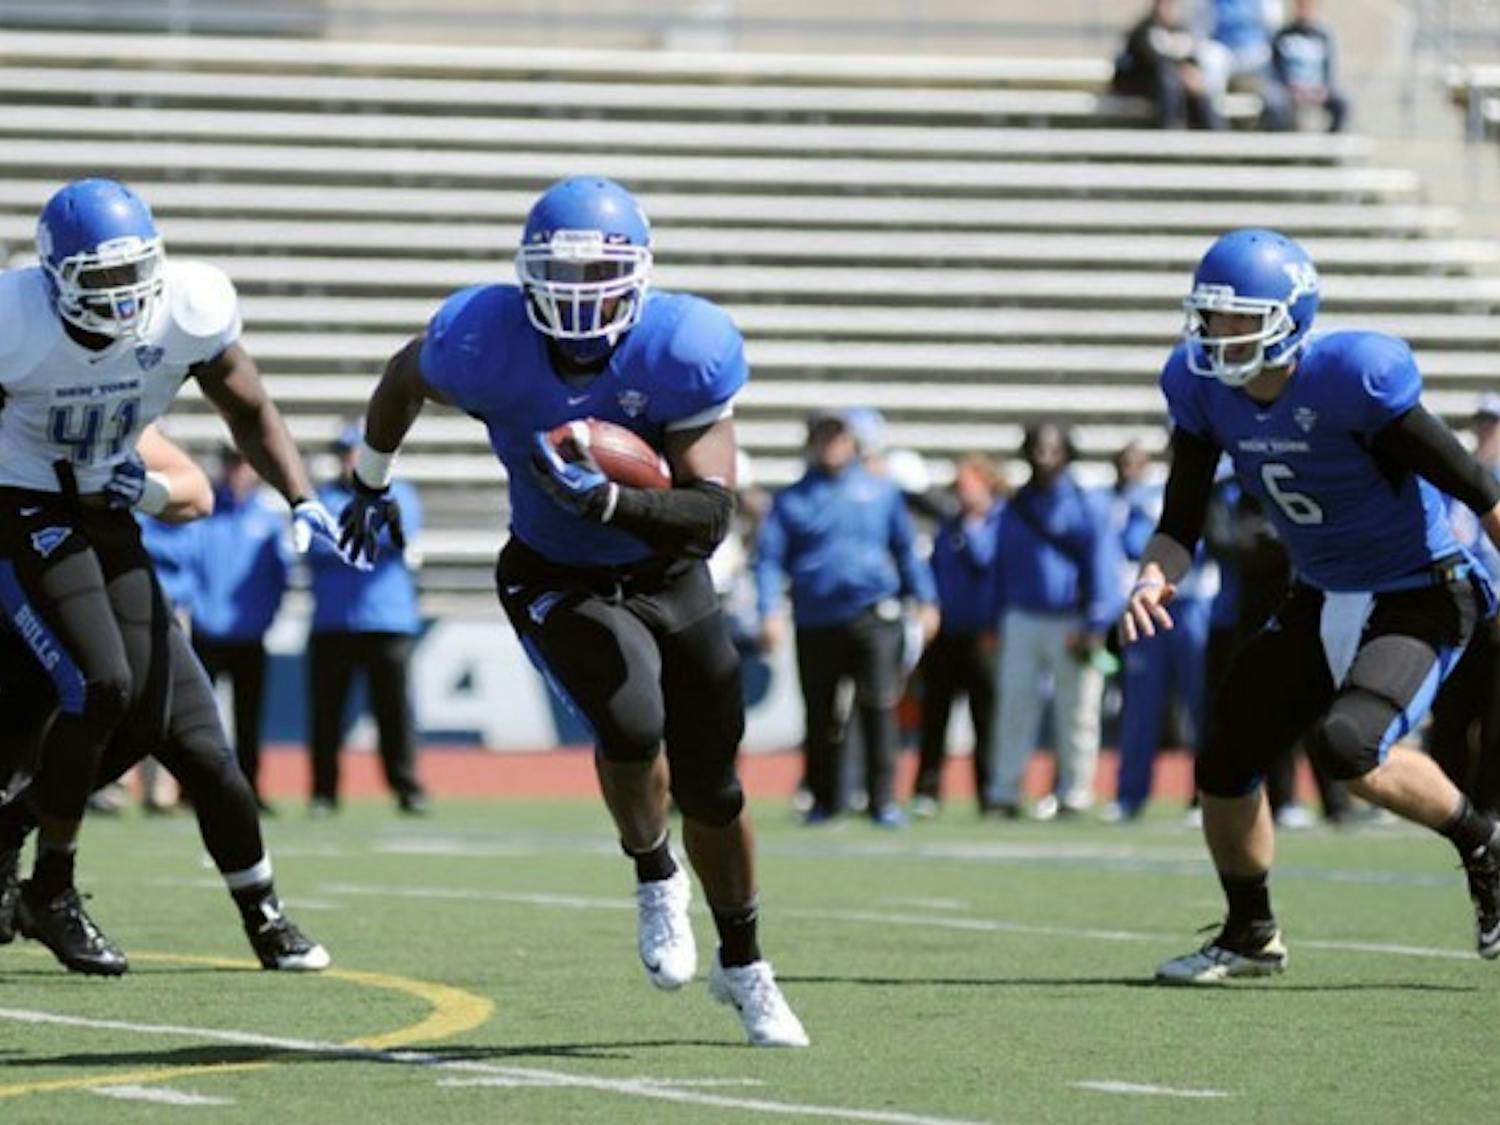 Jordon Johnson has yet to play a down for the Bulls after redshirting as a freshman and missing all of last season with an elbow injury. Johnson participated in the Bulls&rsquo; annual Blue and White spring game on April 19 and ran for 114 yards and two touchdowns.
Nick Fischetti, The Spectrum